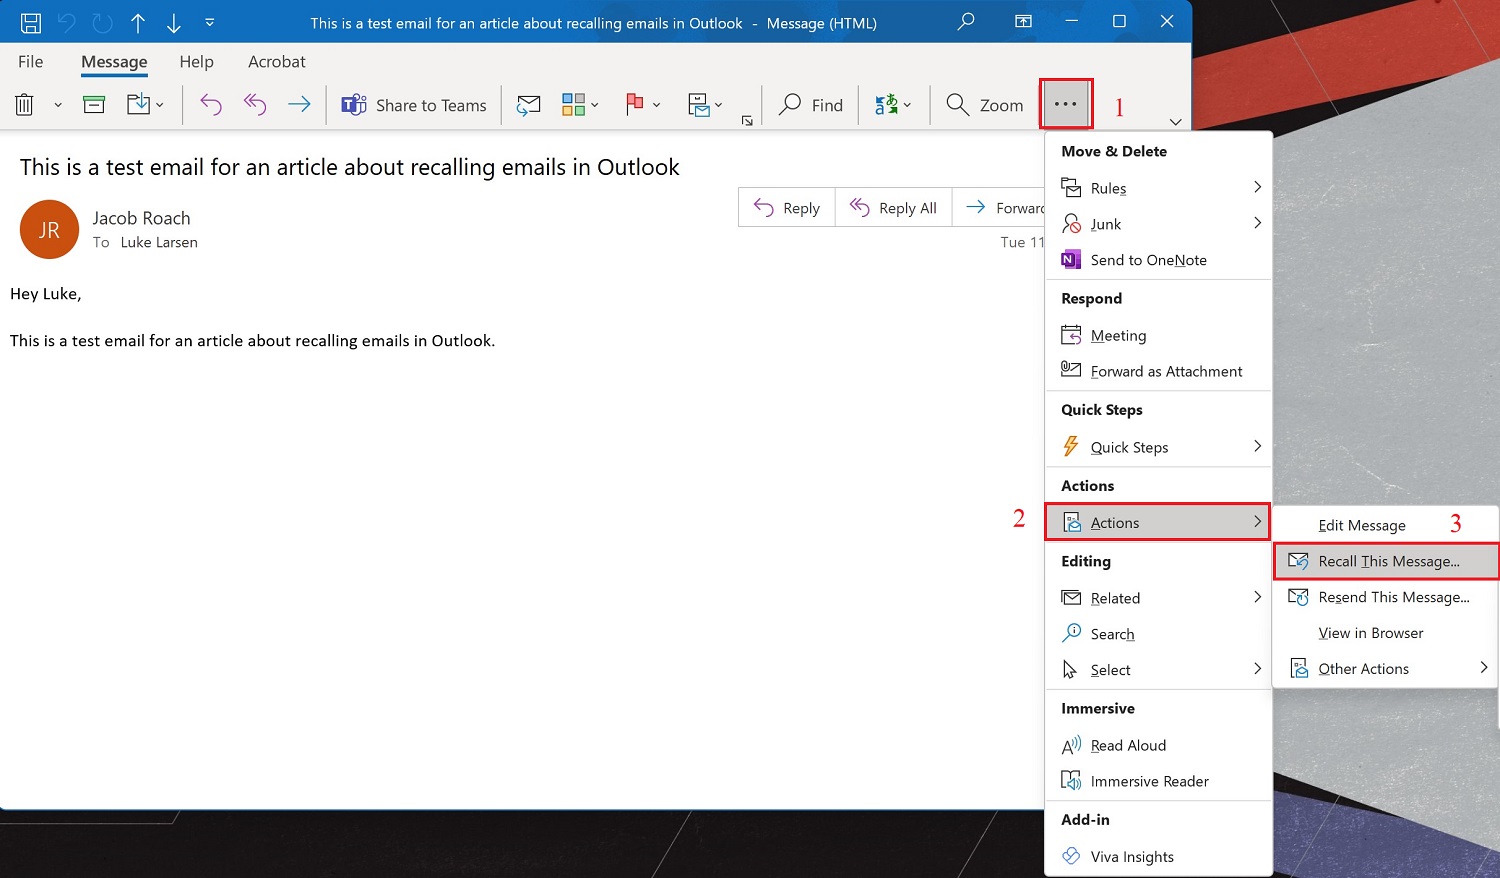 Recall this message option in Outlook.